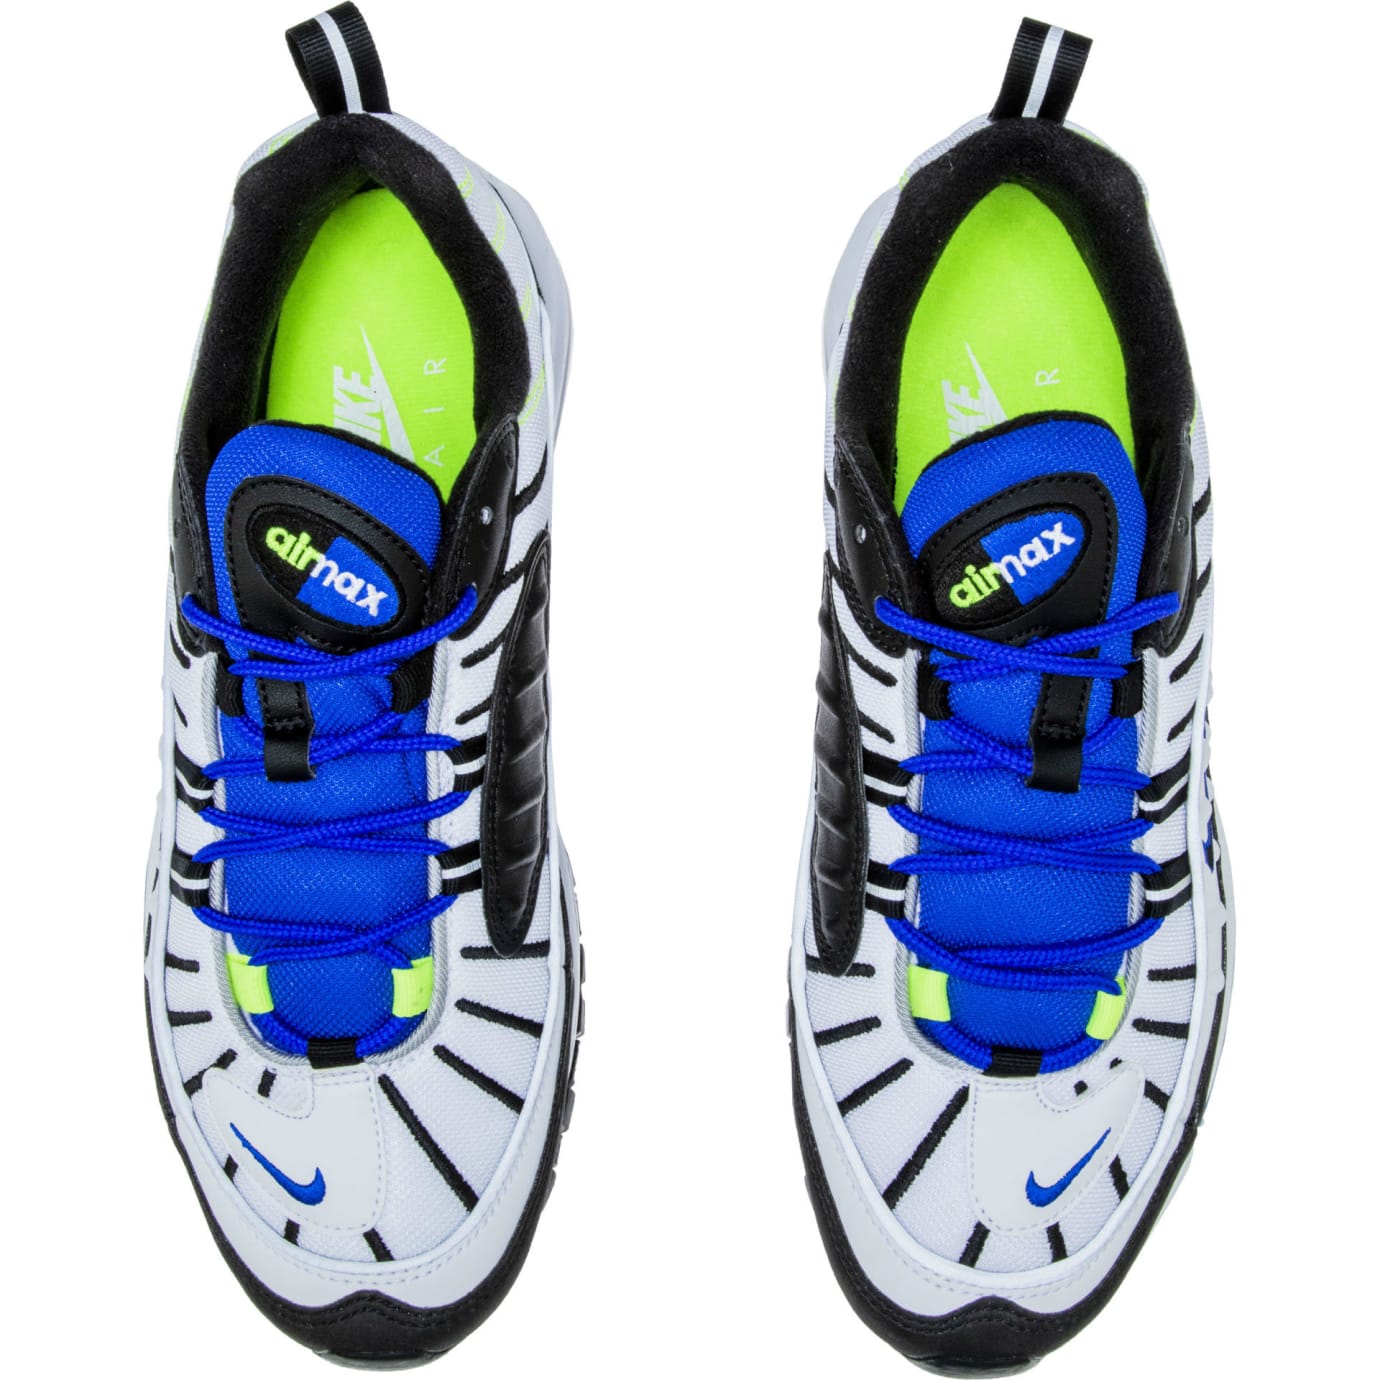 Nike Air Max 98 White Black Racer Blue Volt Release Date 640744-103 Sole Collector